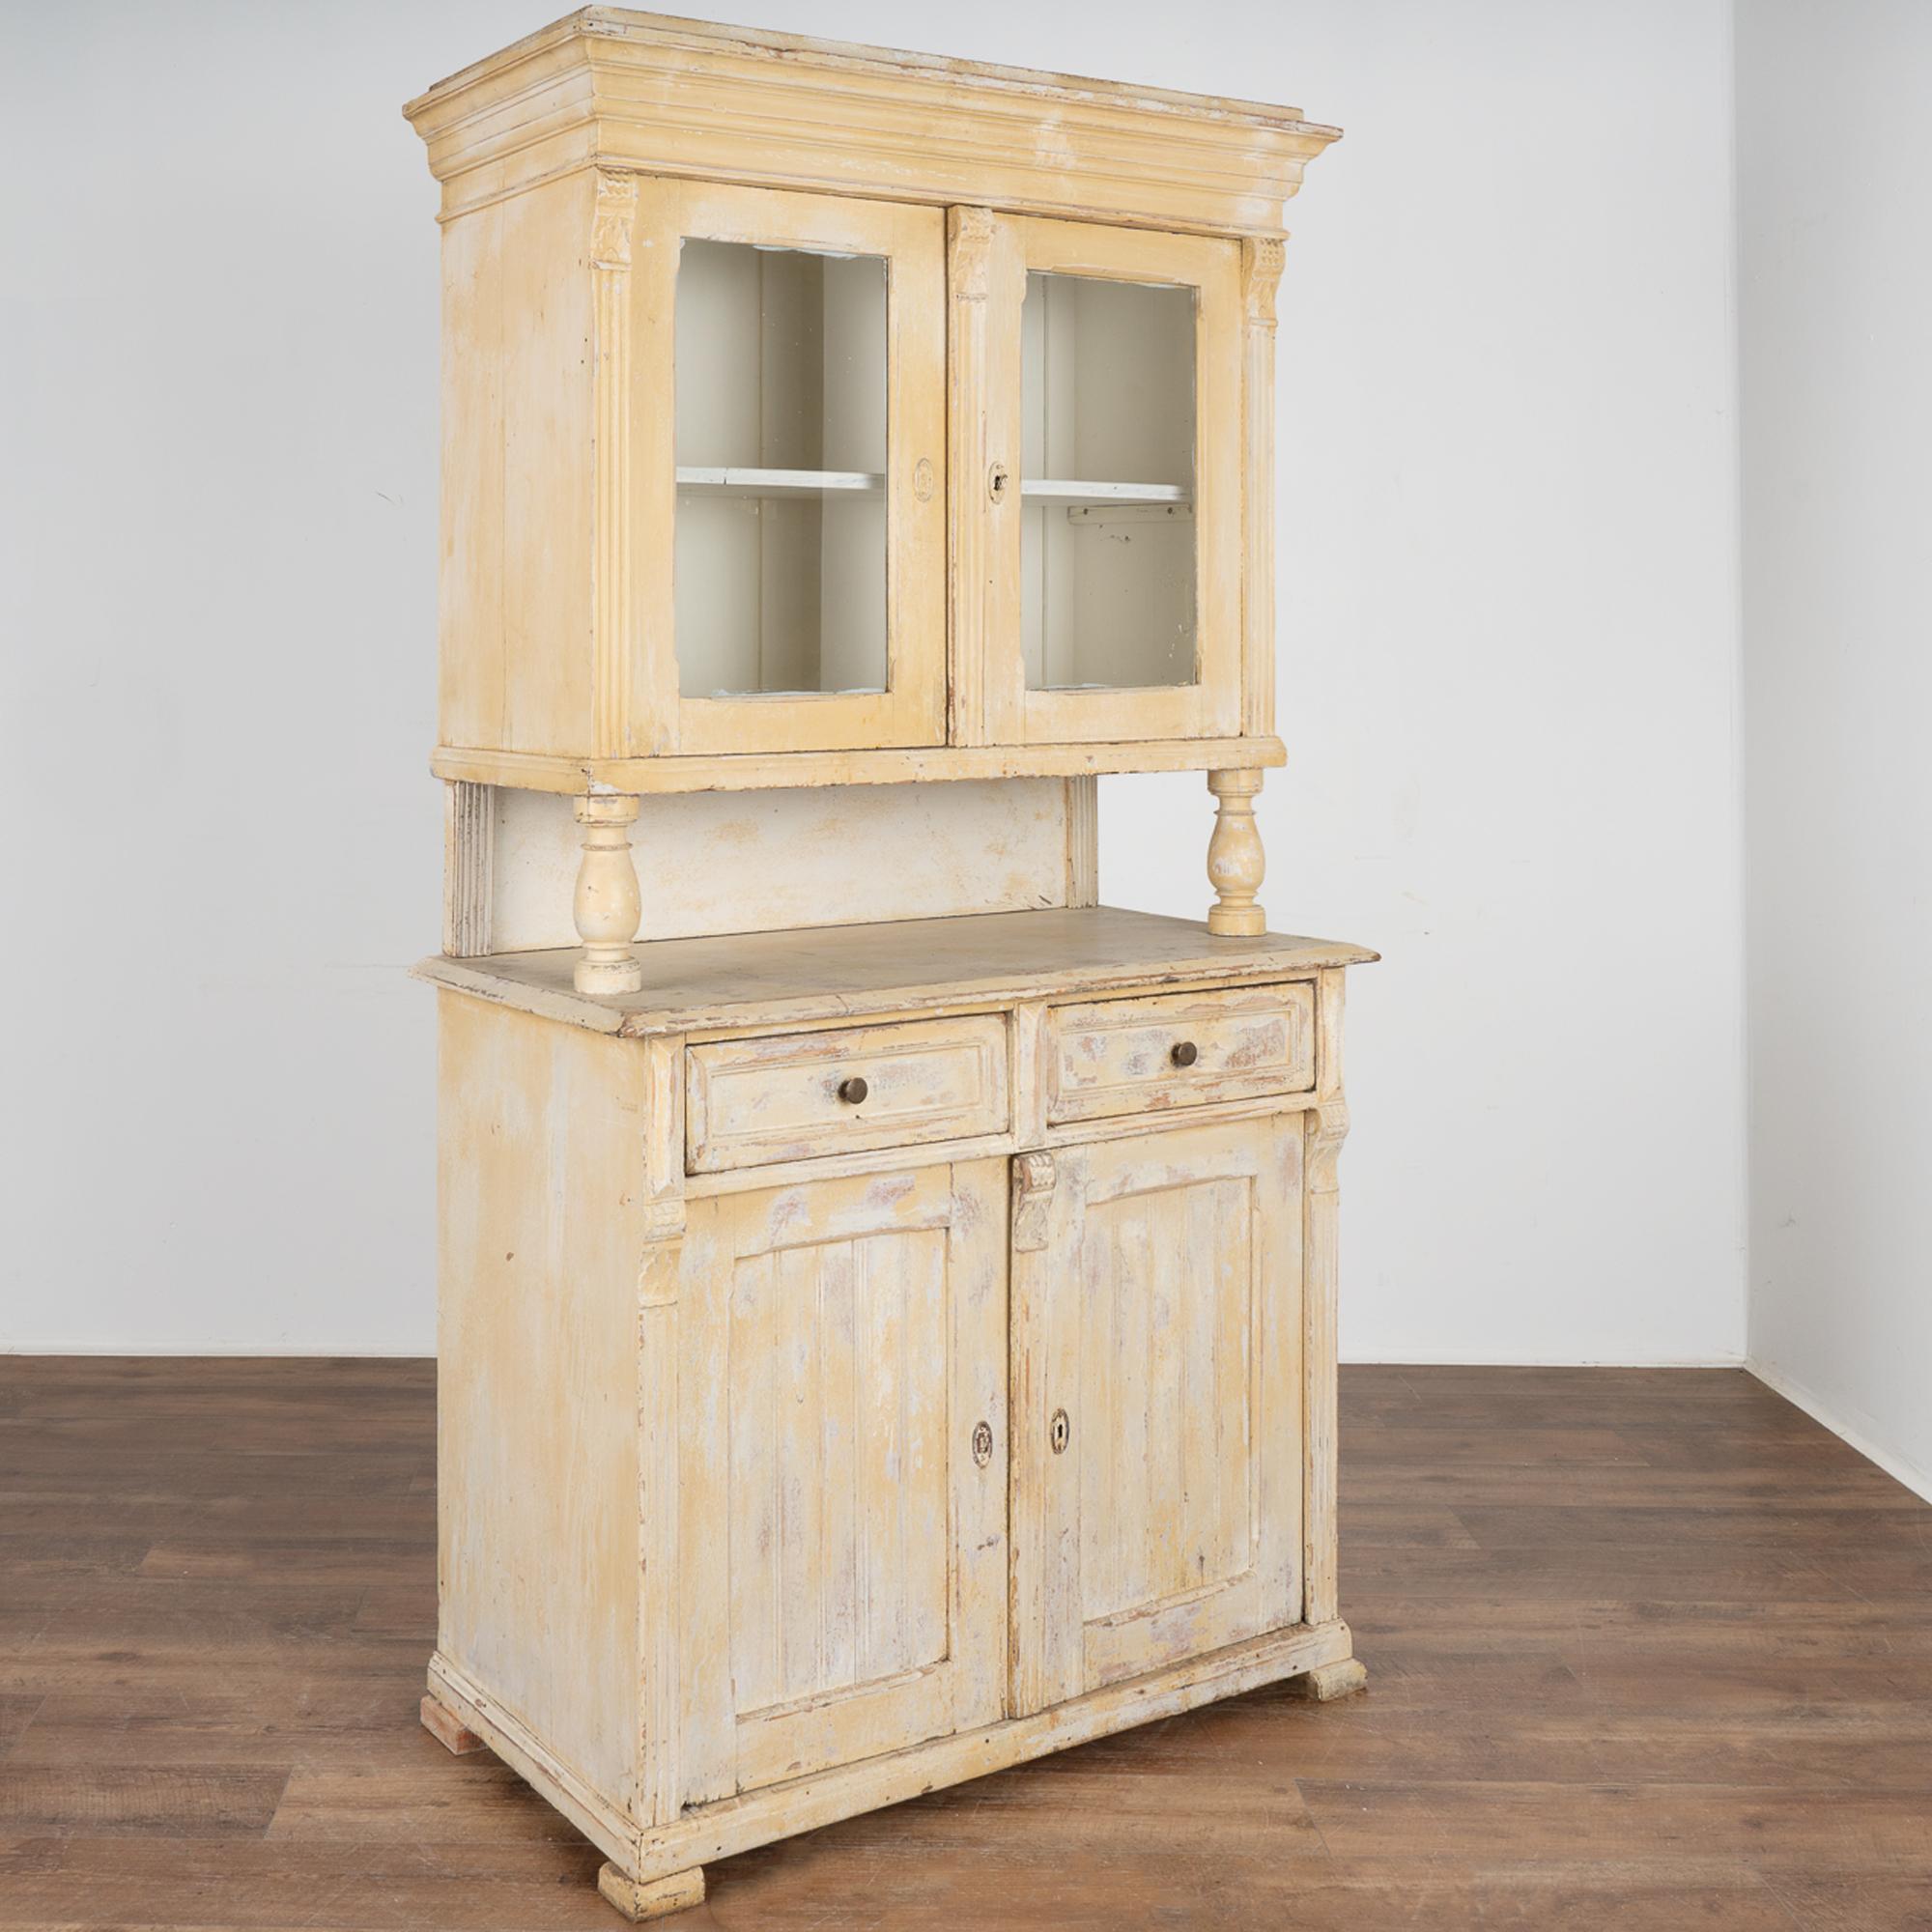 This old pine cupboard has been painted over multiple times in its long life, with current tones of layered pale ochre and white all distressed revealing the natural pine below.
This traditional pine cabinet allows for items to be displayed behind